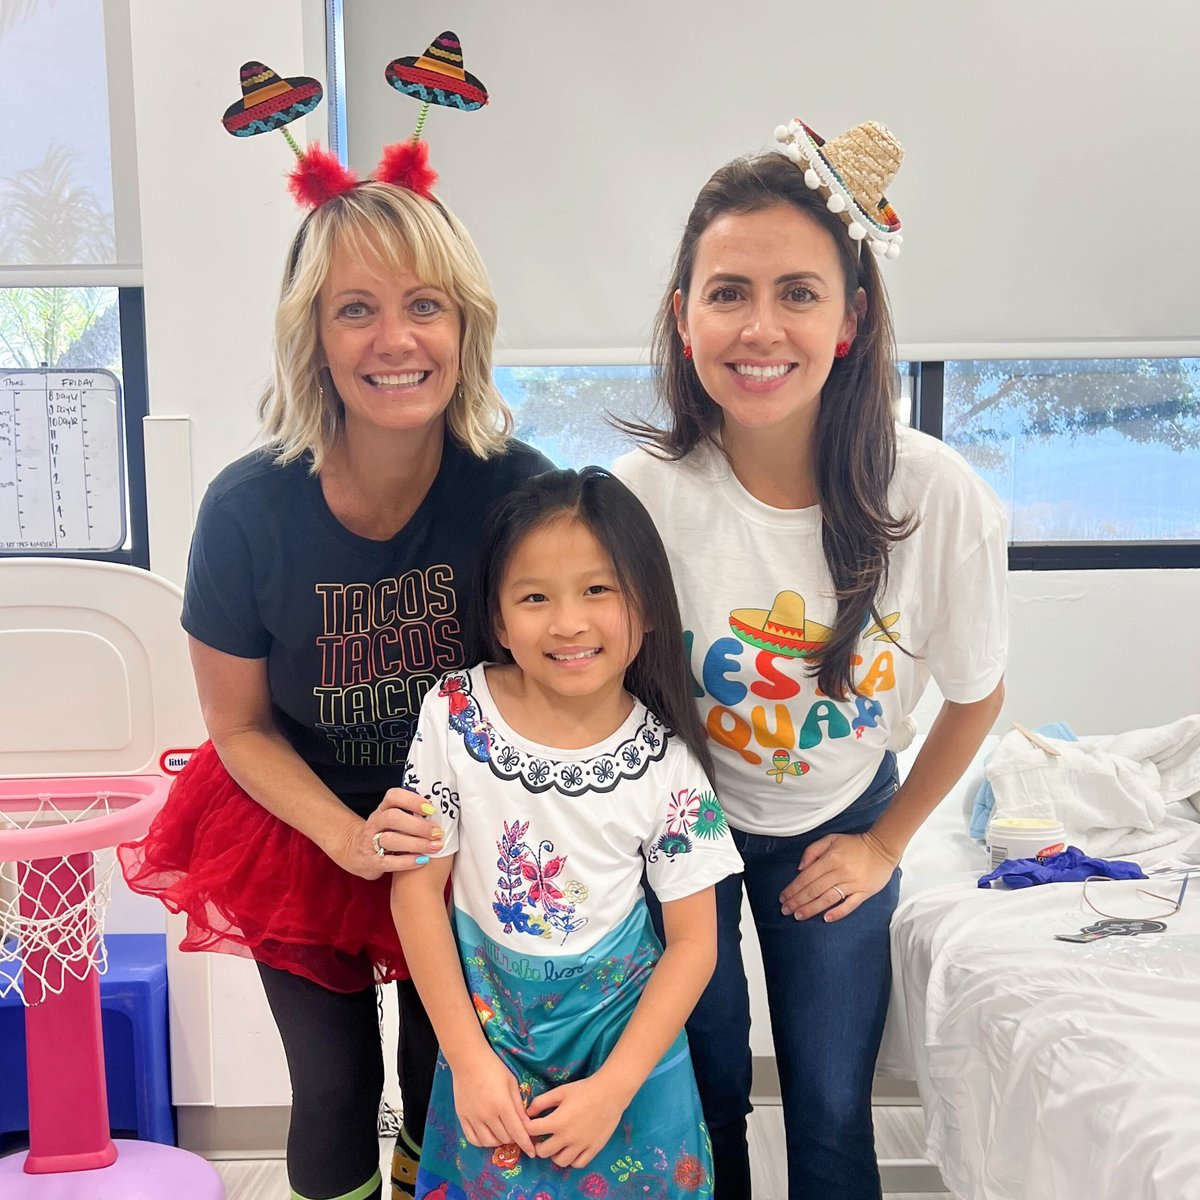 We love celebrating Fun Fridays! Our goal is simple: to make our patients smile and brighten their day. #FunFridays #PaleyCare #PaleyInstitute #PatientFirst